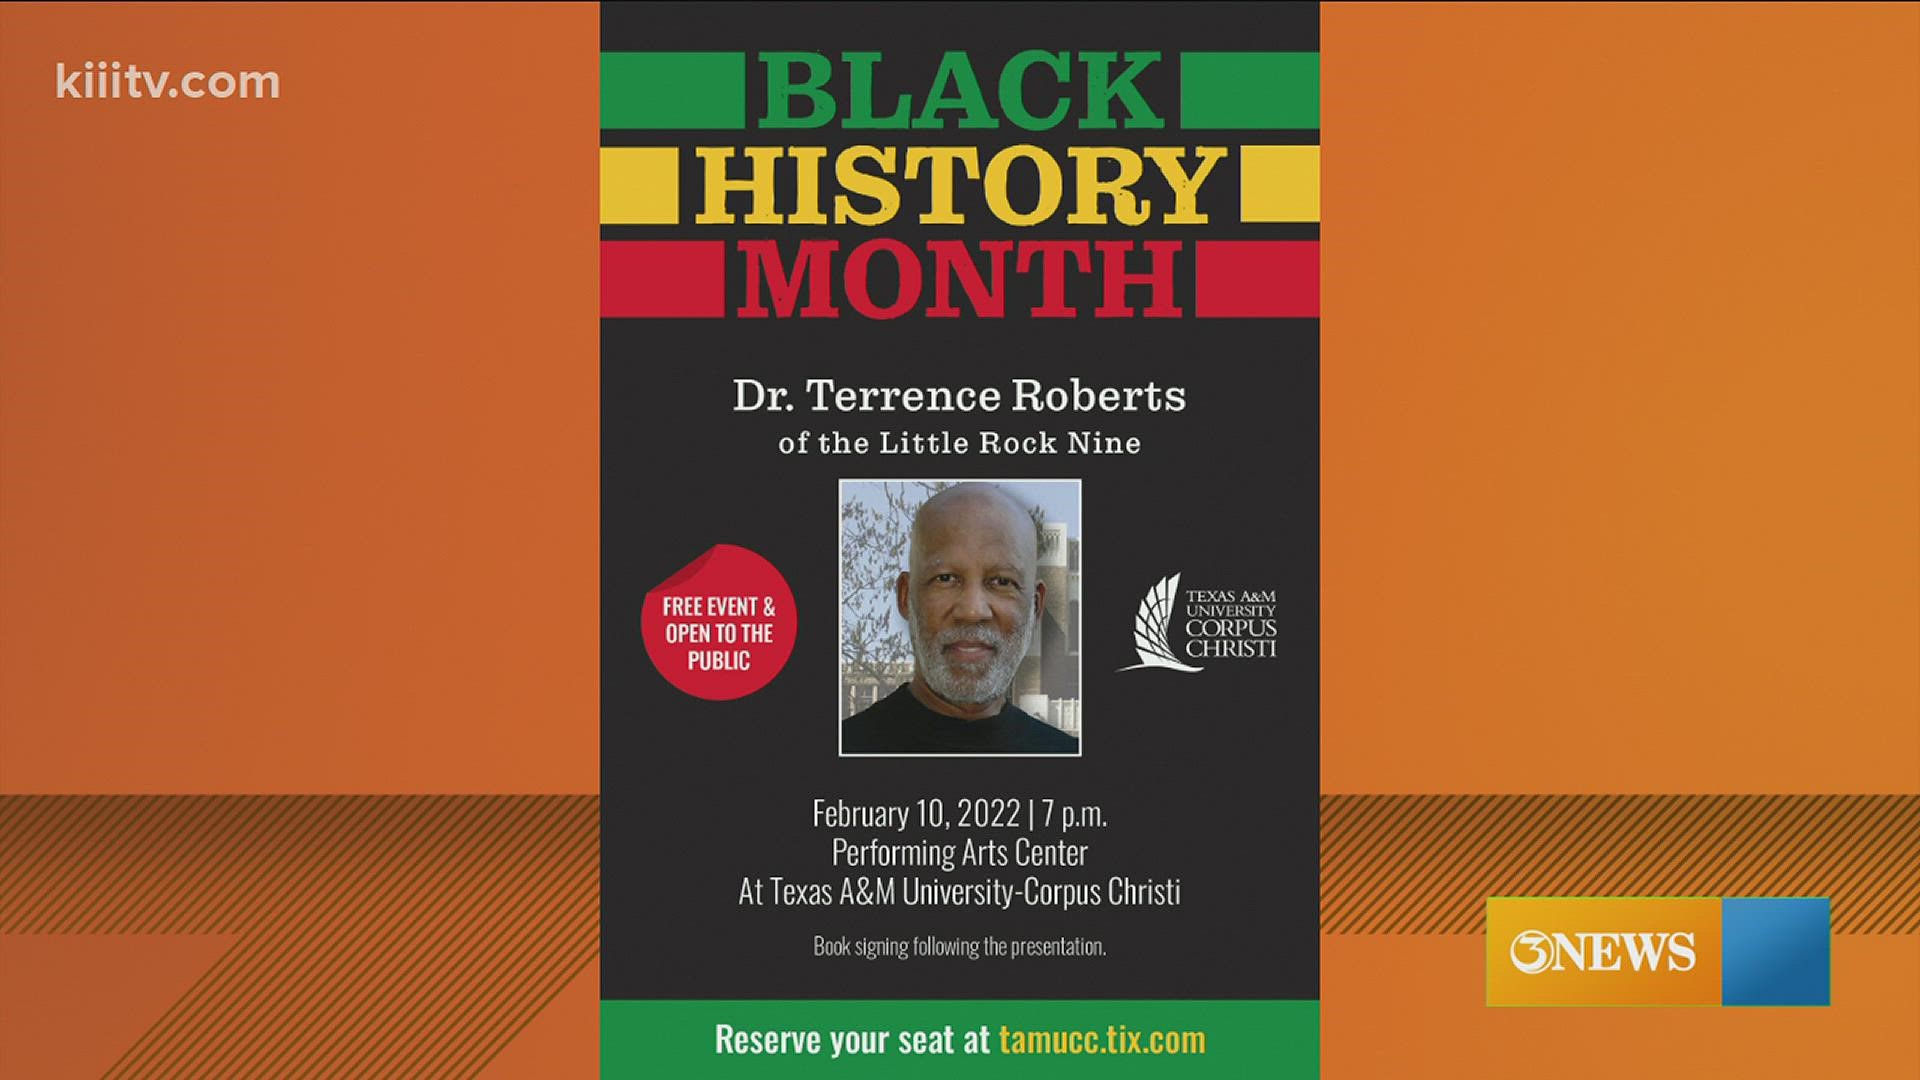 Dr. Terrence Roberts will be giving a presentation as part of TAMUCC's Distinguished Speaker Series.